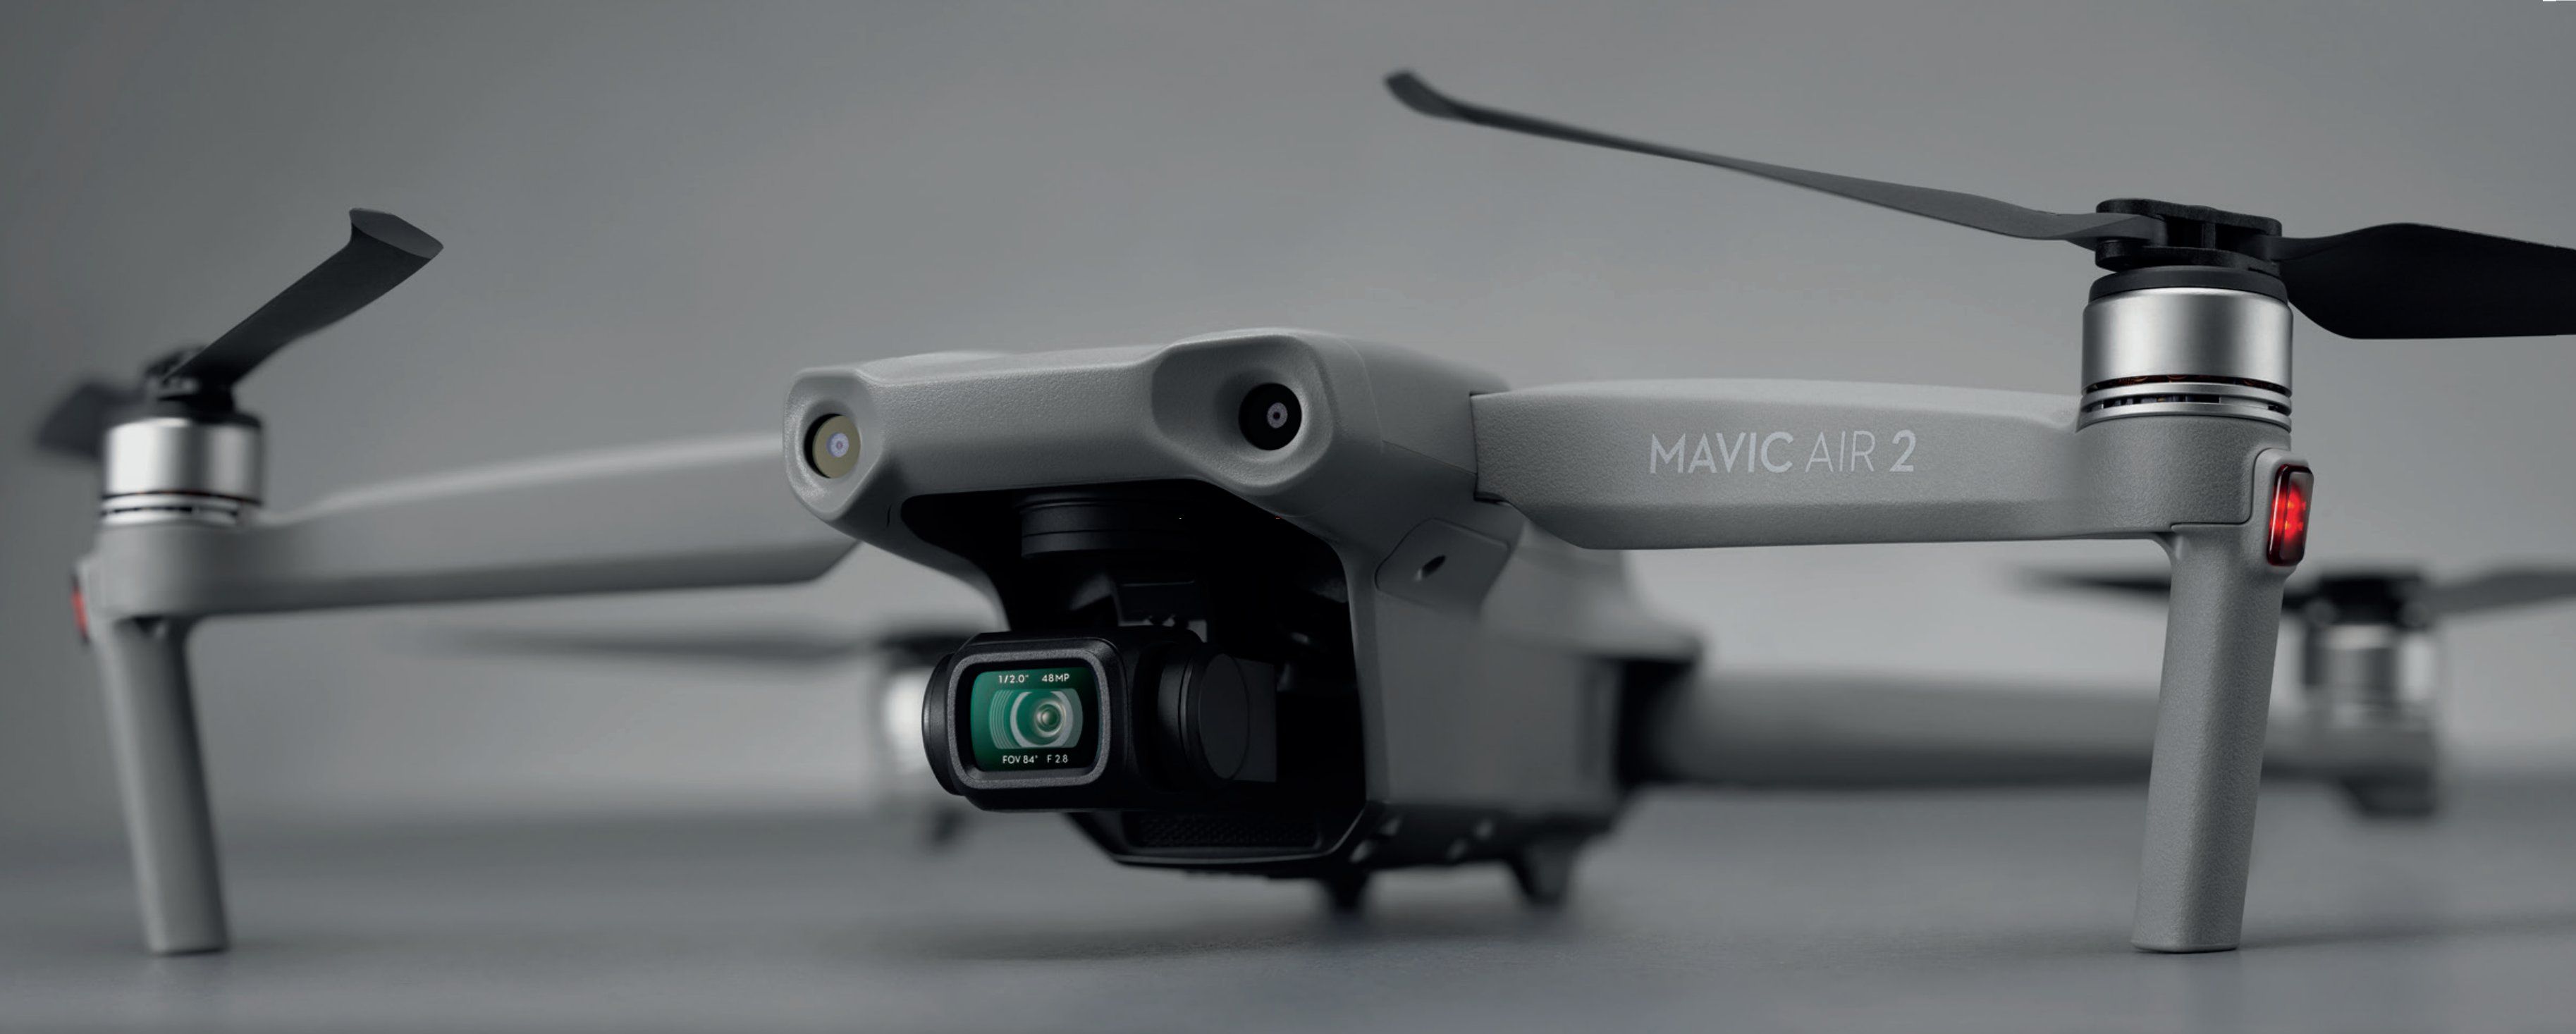 DJI Mavic Air 2: Official image of the new drone and accessories leak ahead of imminent release.net News